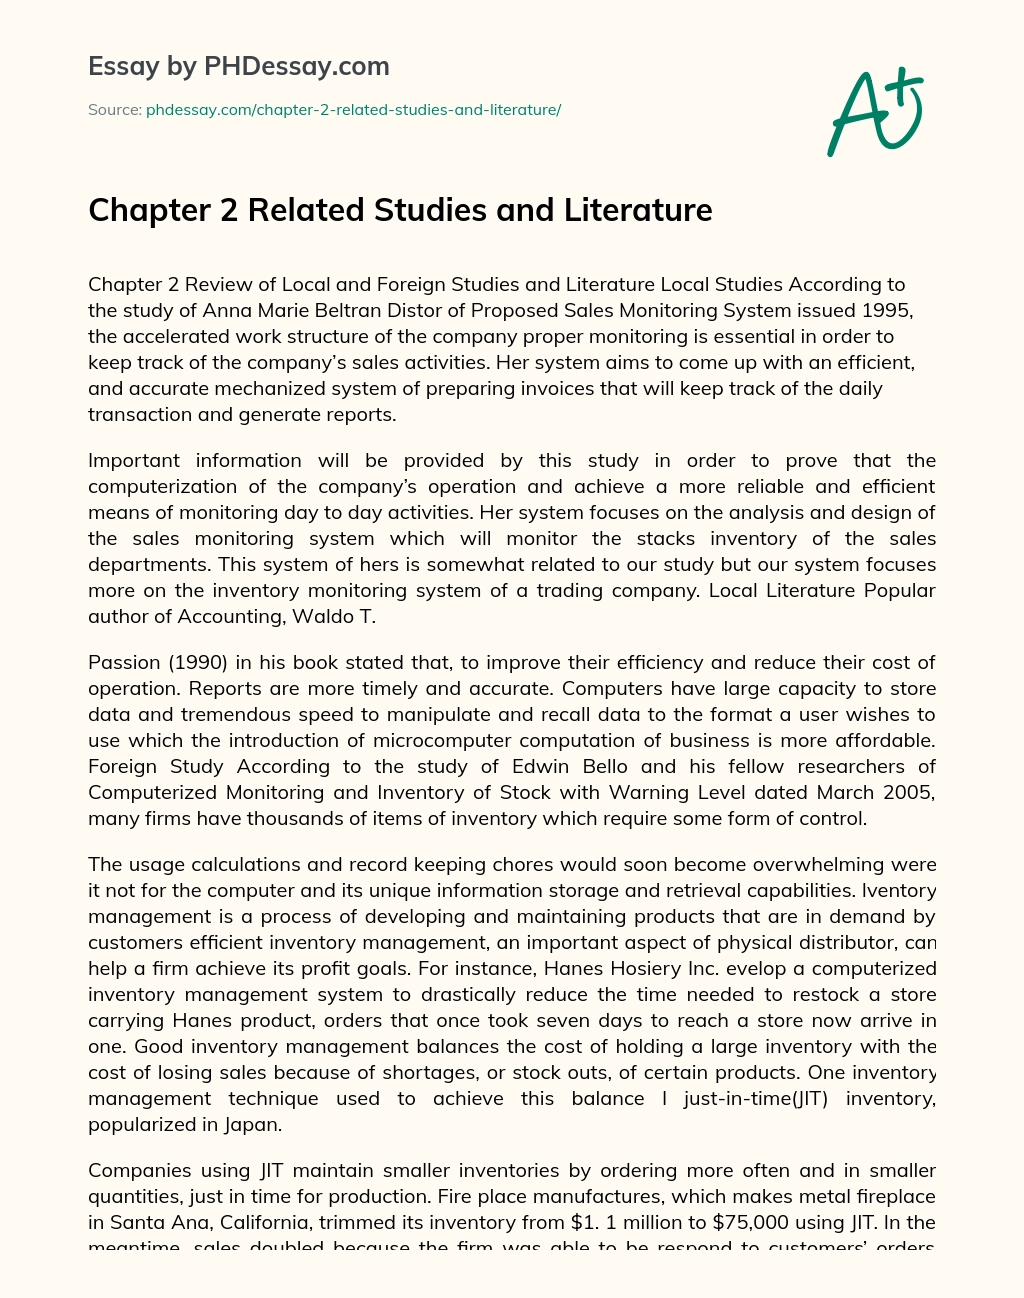 Chapter 2 Related Studies and Literature essay